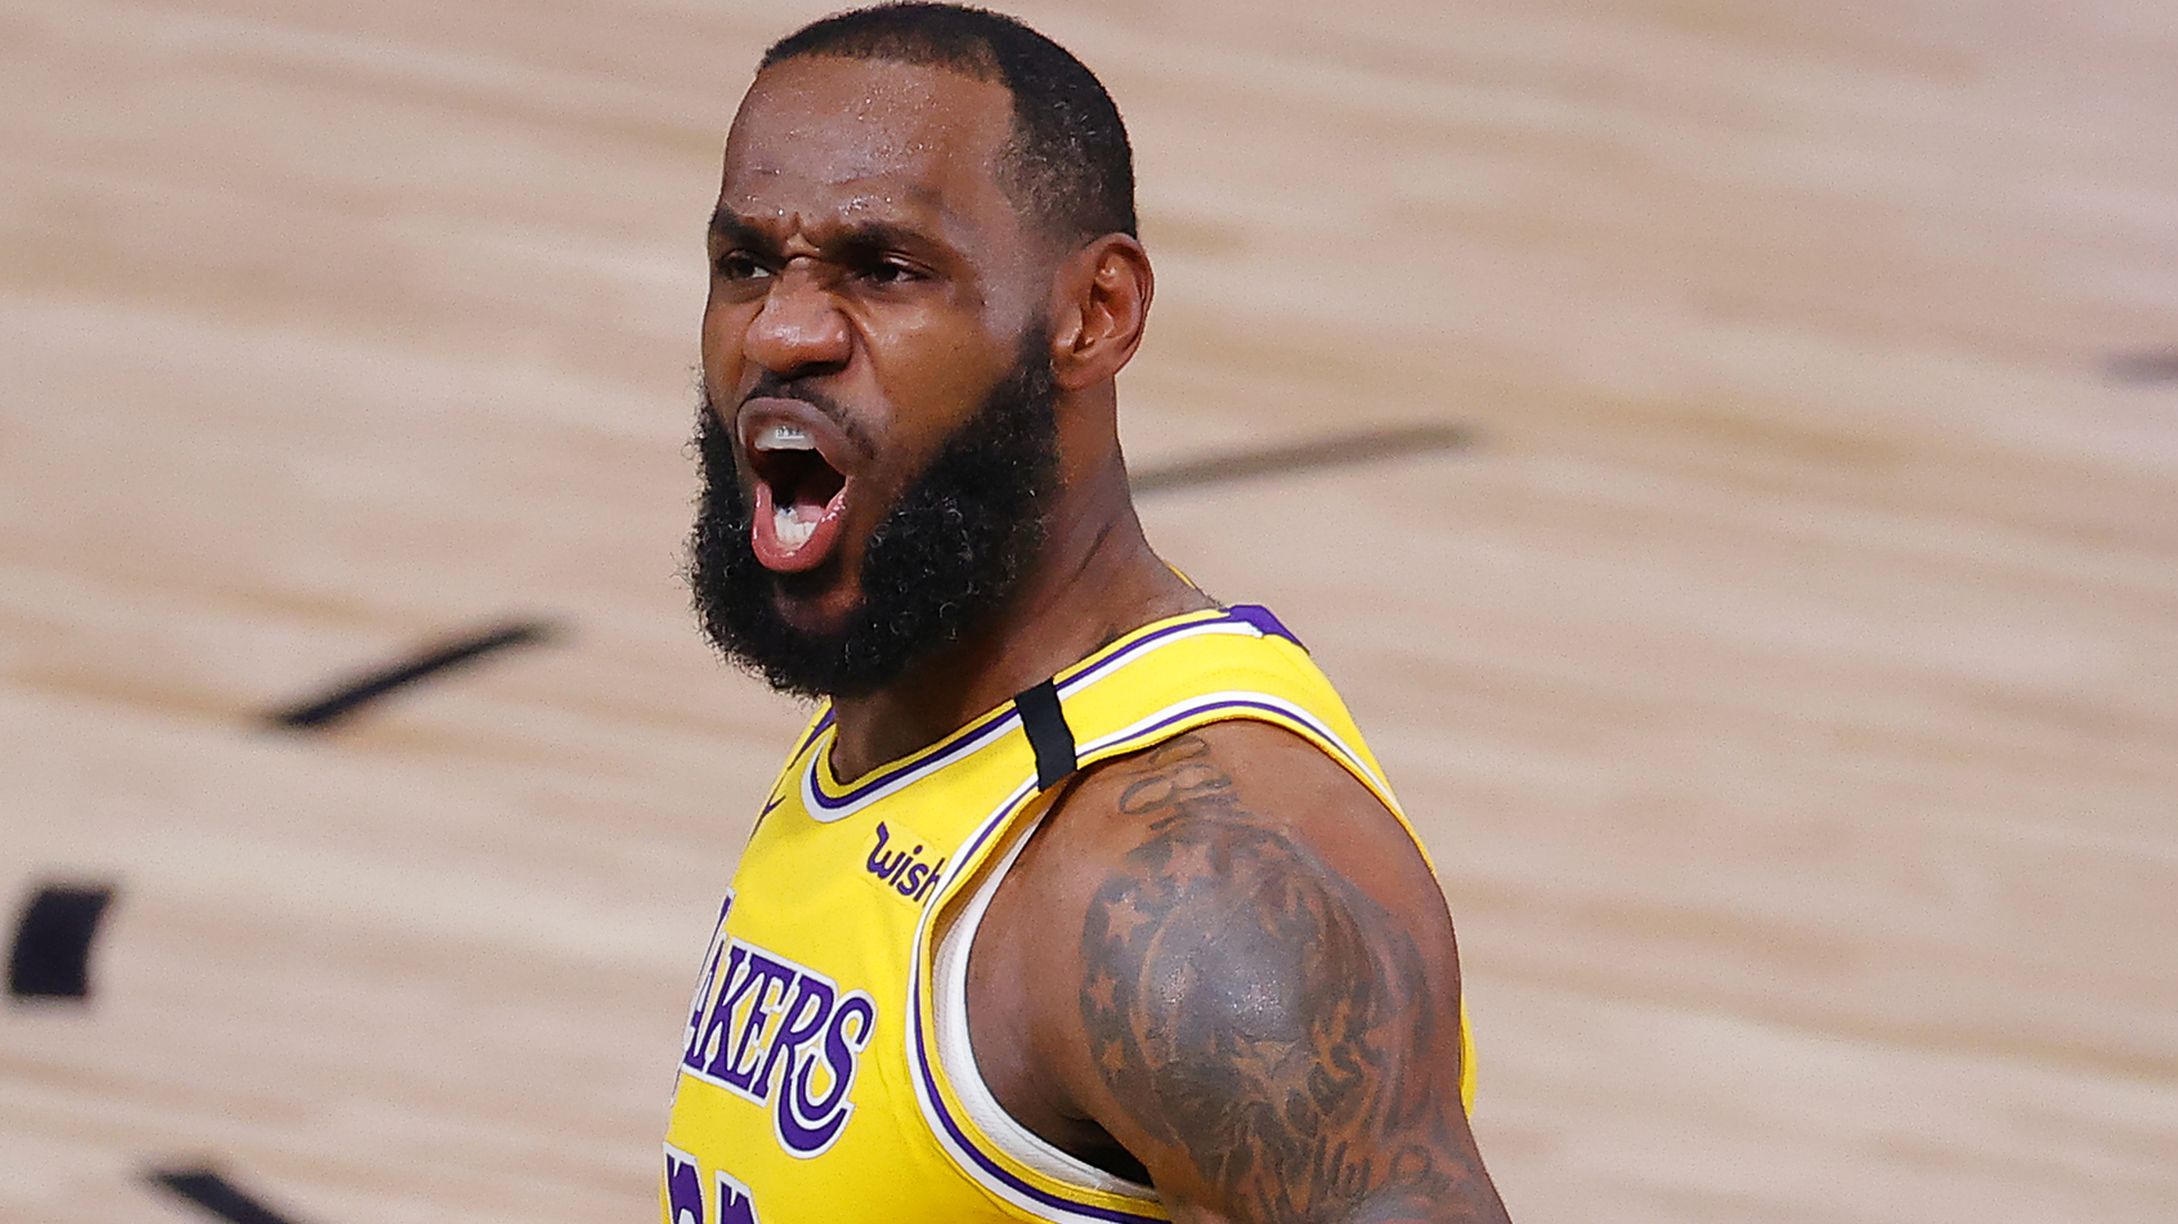 LeBron James of the Los Angeles Lakers reacts after a dunk.